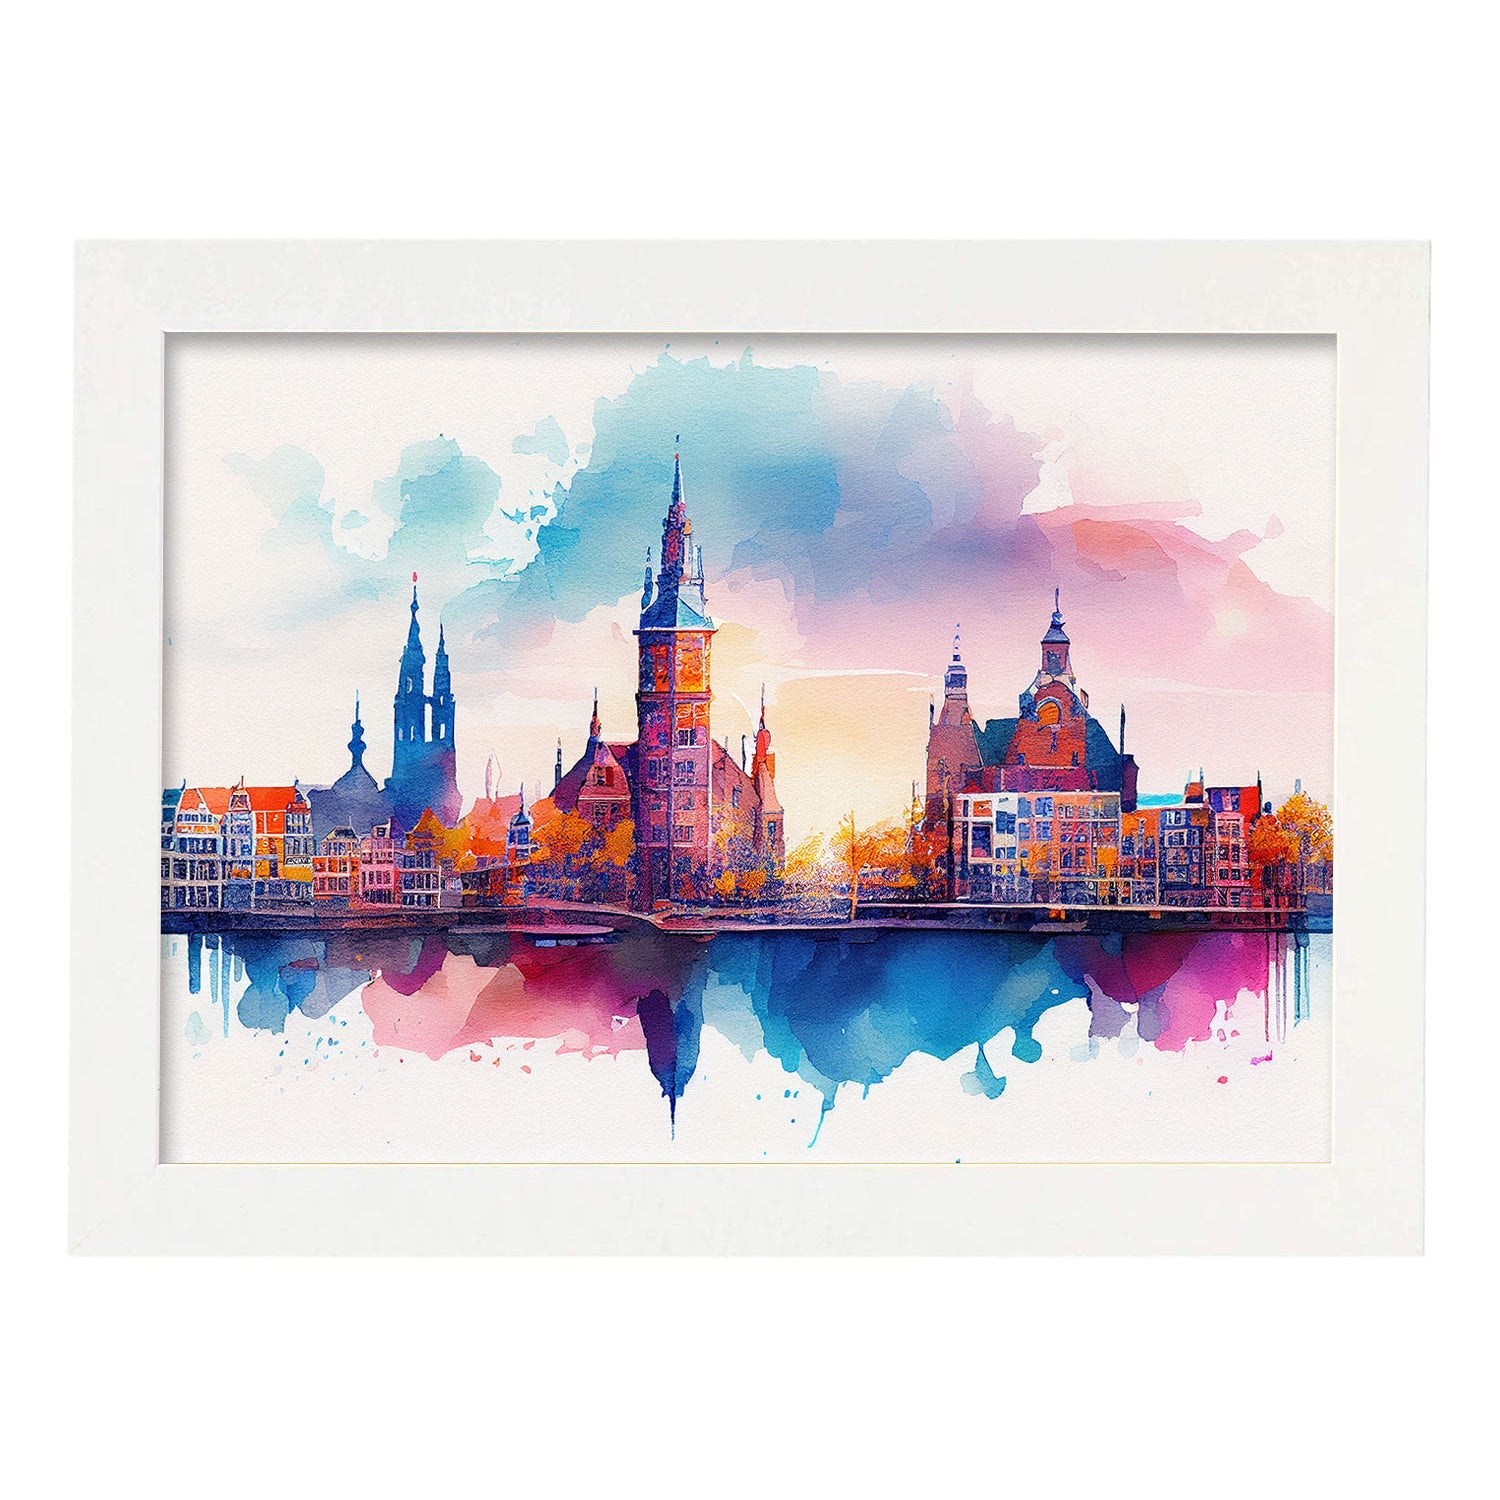 Nacnic watercolor of a skyline of the city of Amsterdam_3. Aesthetic Wall Art Prints for Bedroom or Living Room Design.-Artwork-Nacnic-A4-Marco Blanco-Nacnic Estudio SL